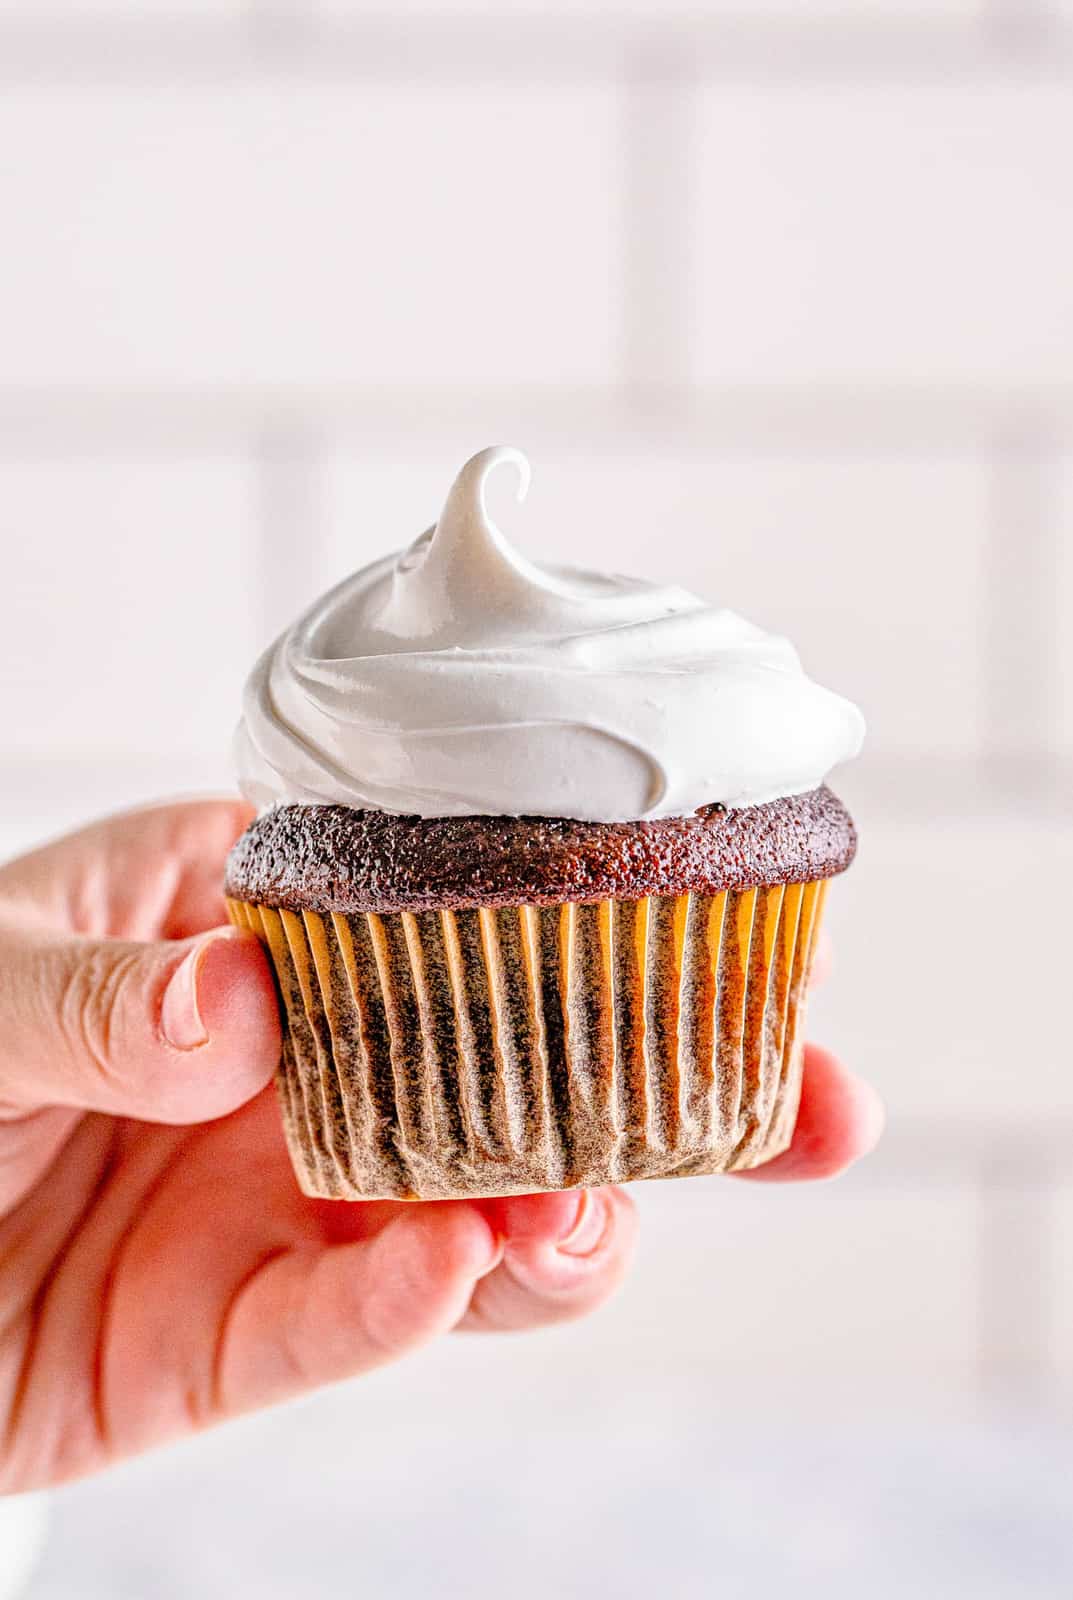 Hand holding up a cupcake with Marshmallow Frosting on it.